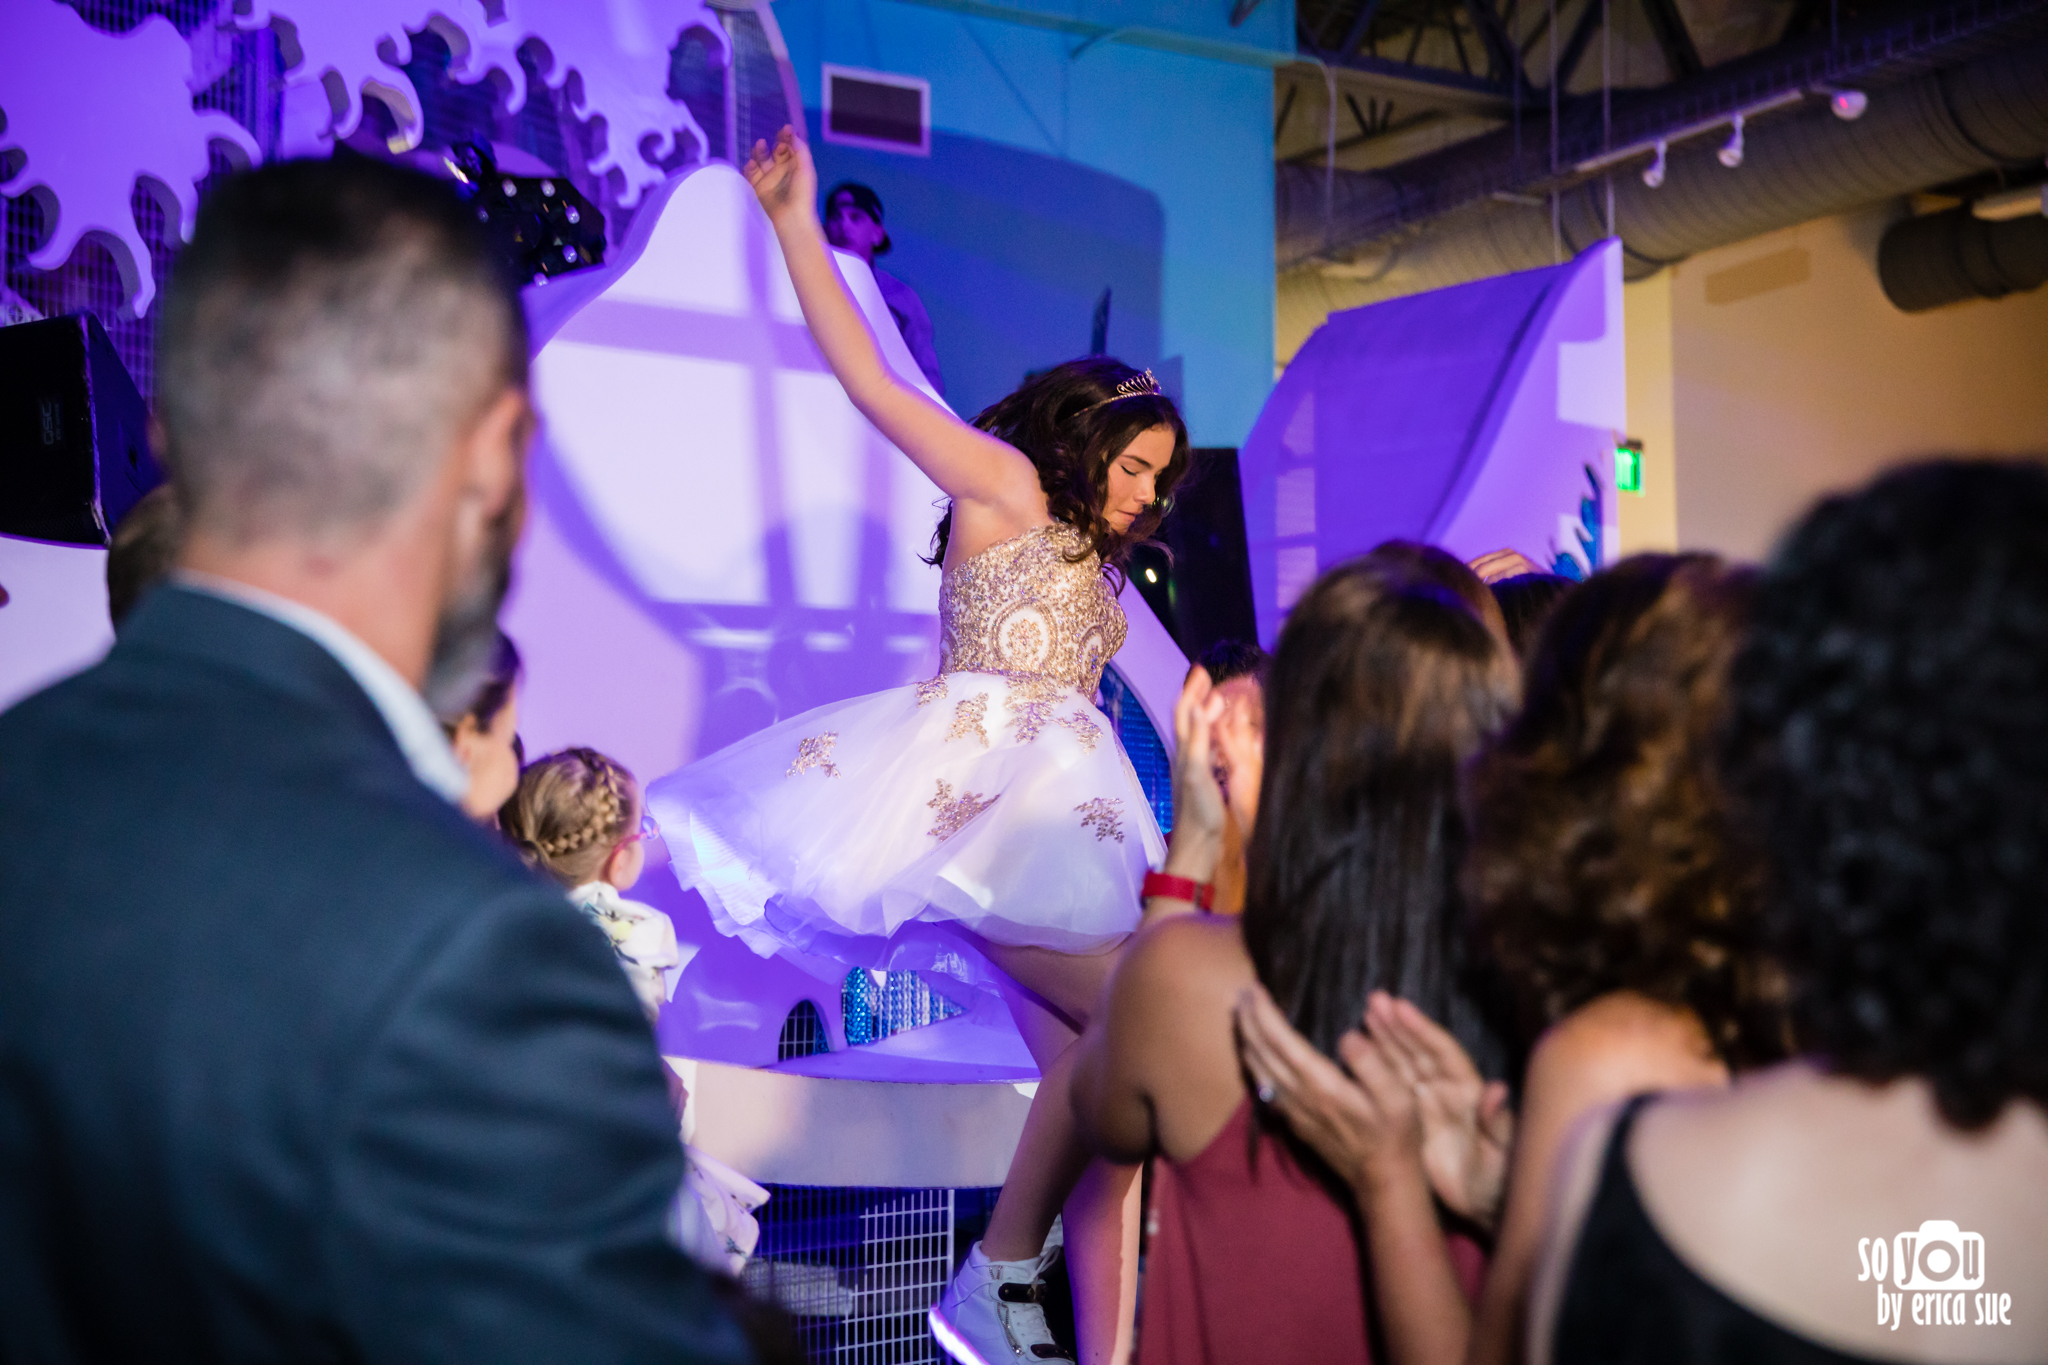 so-you-by-erica-sue-bar-bat-mitzvah-young-at-art-davie-fl-photography-5021.jpg